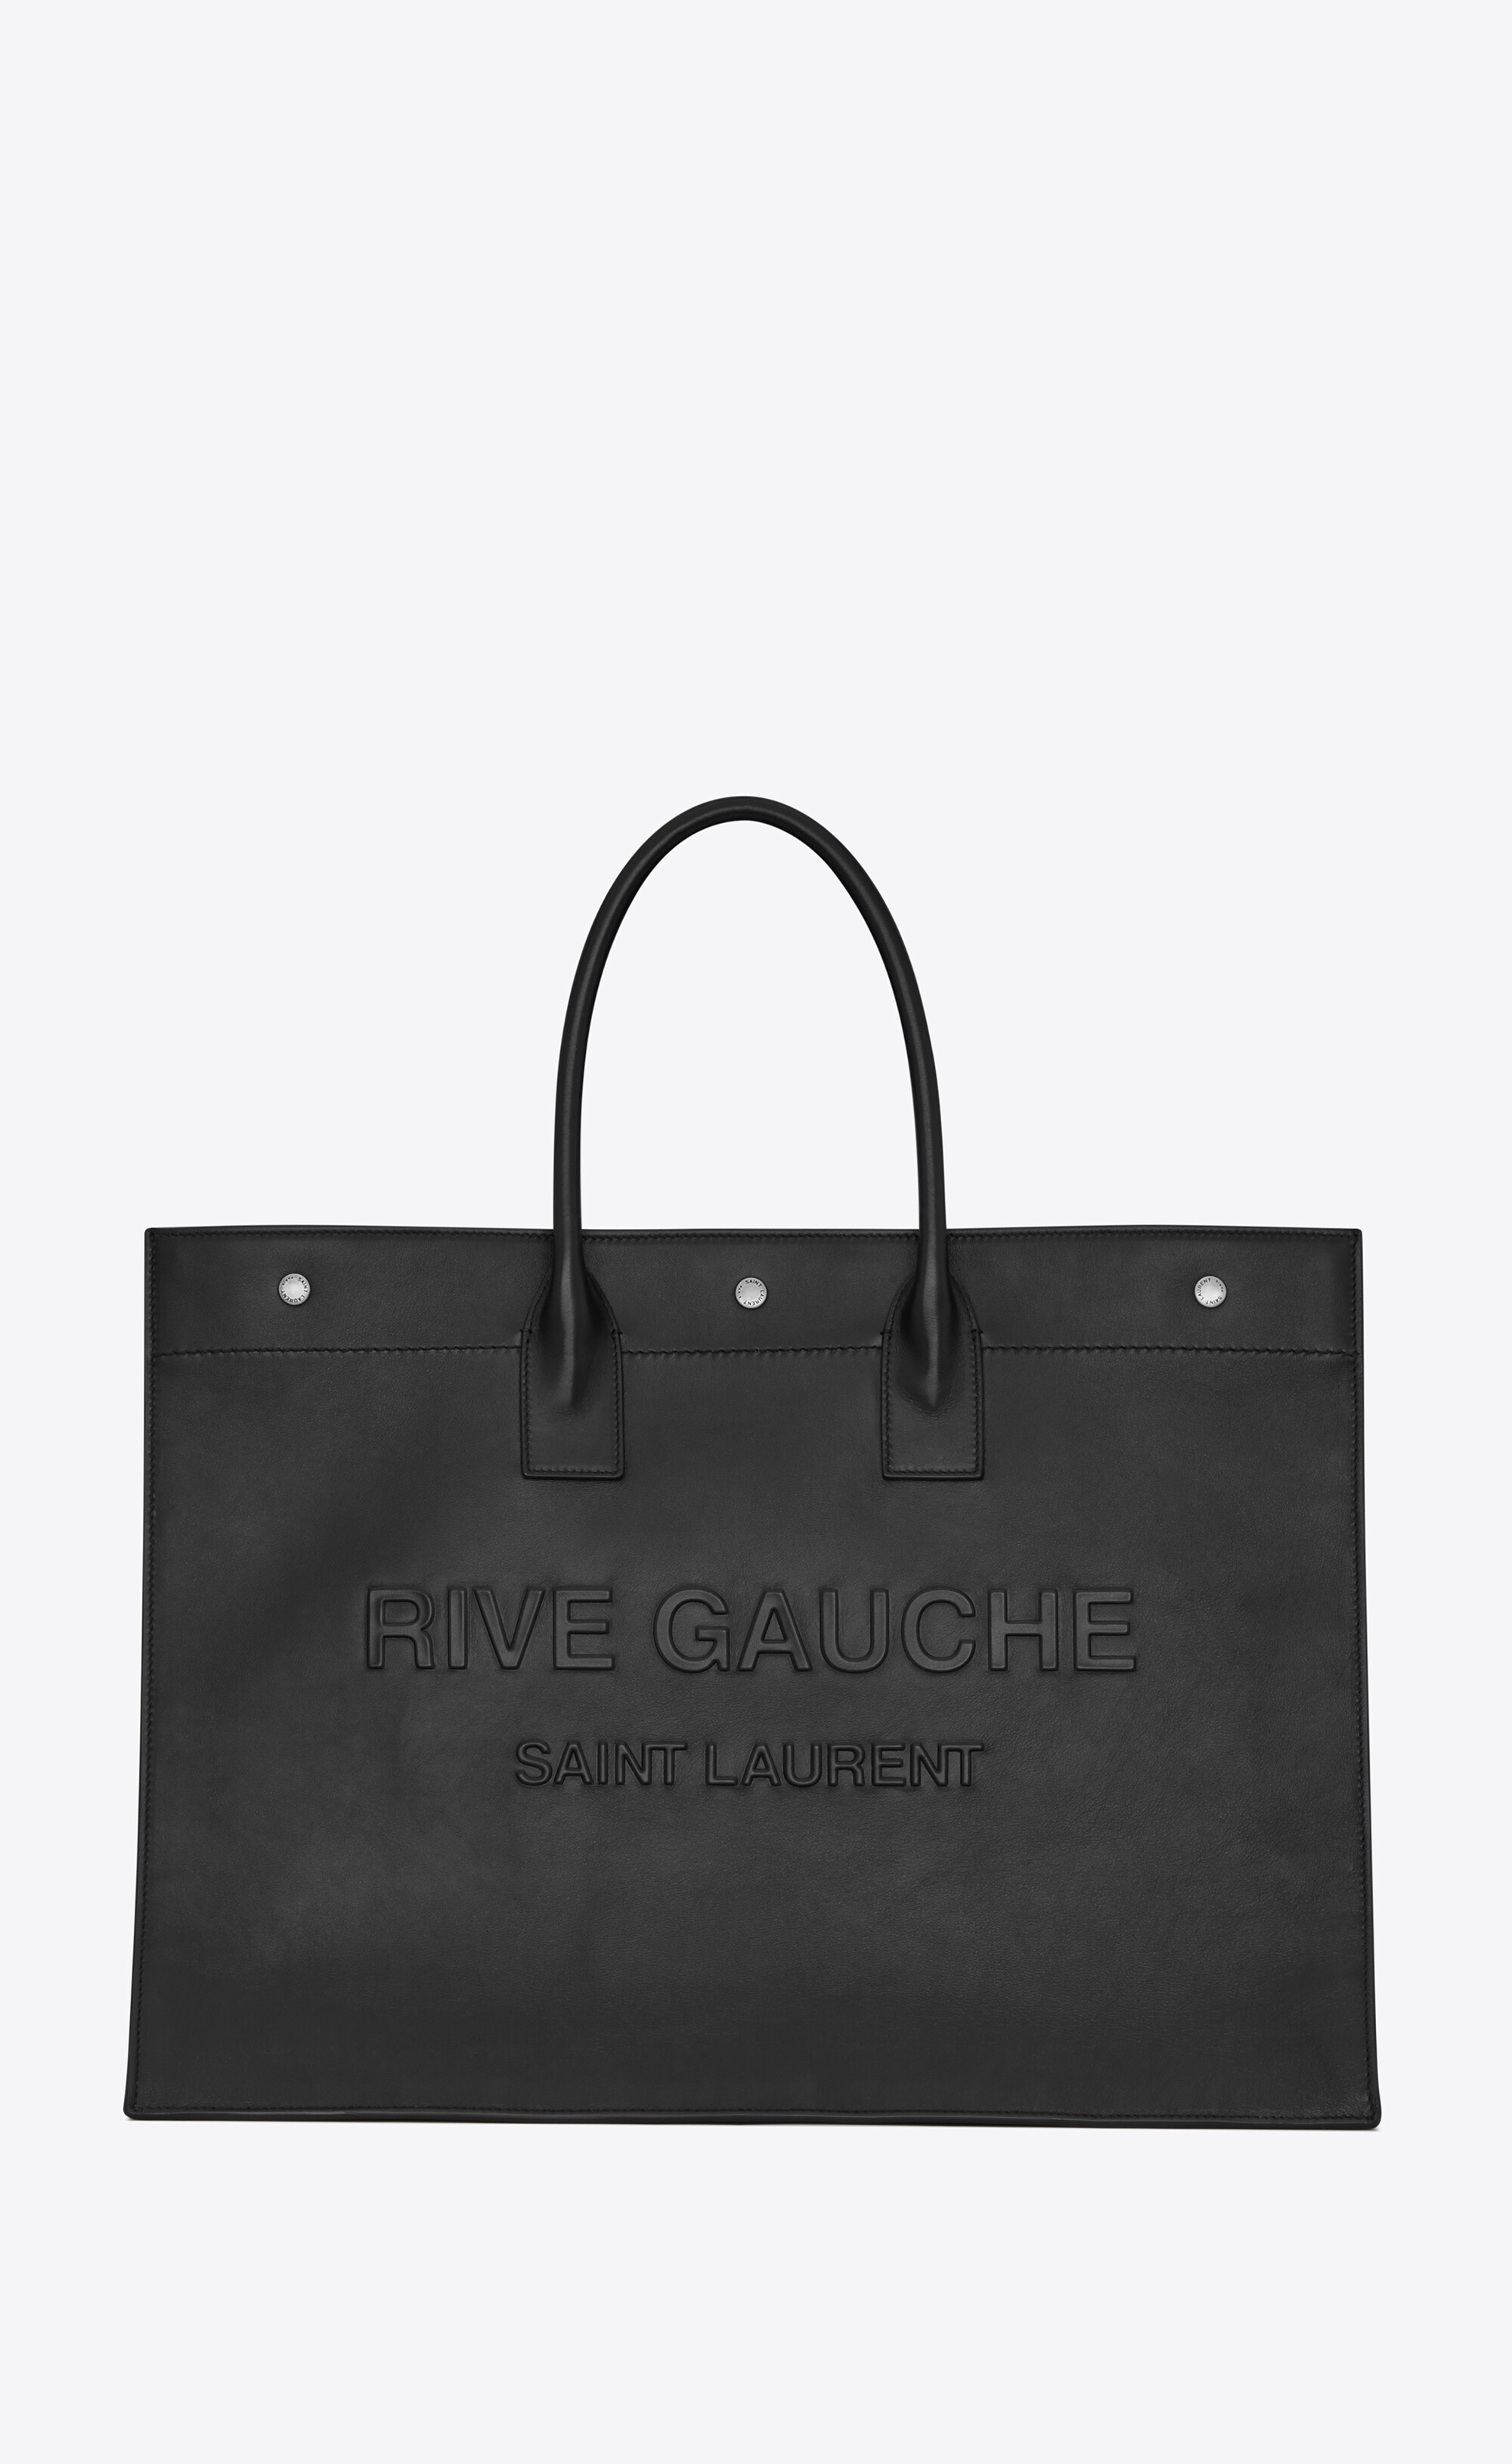 RIVE GAUCHE large tote bag in smooth leather, Saint Laurent